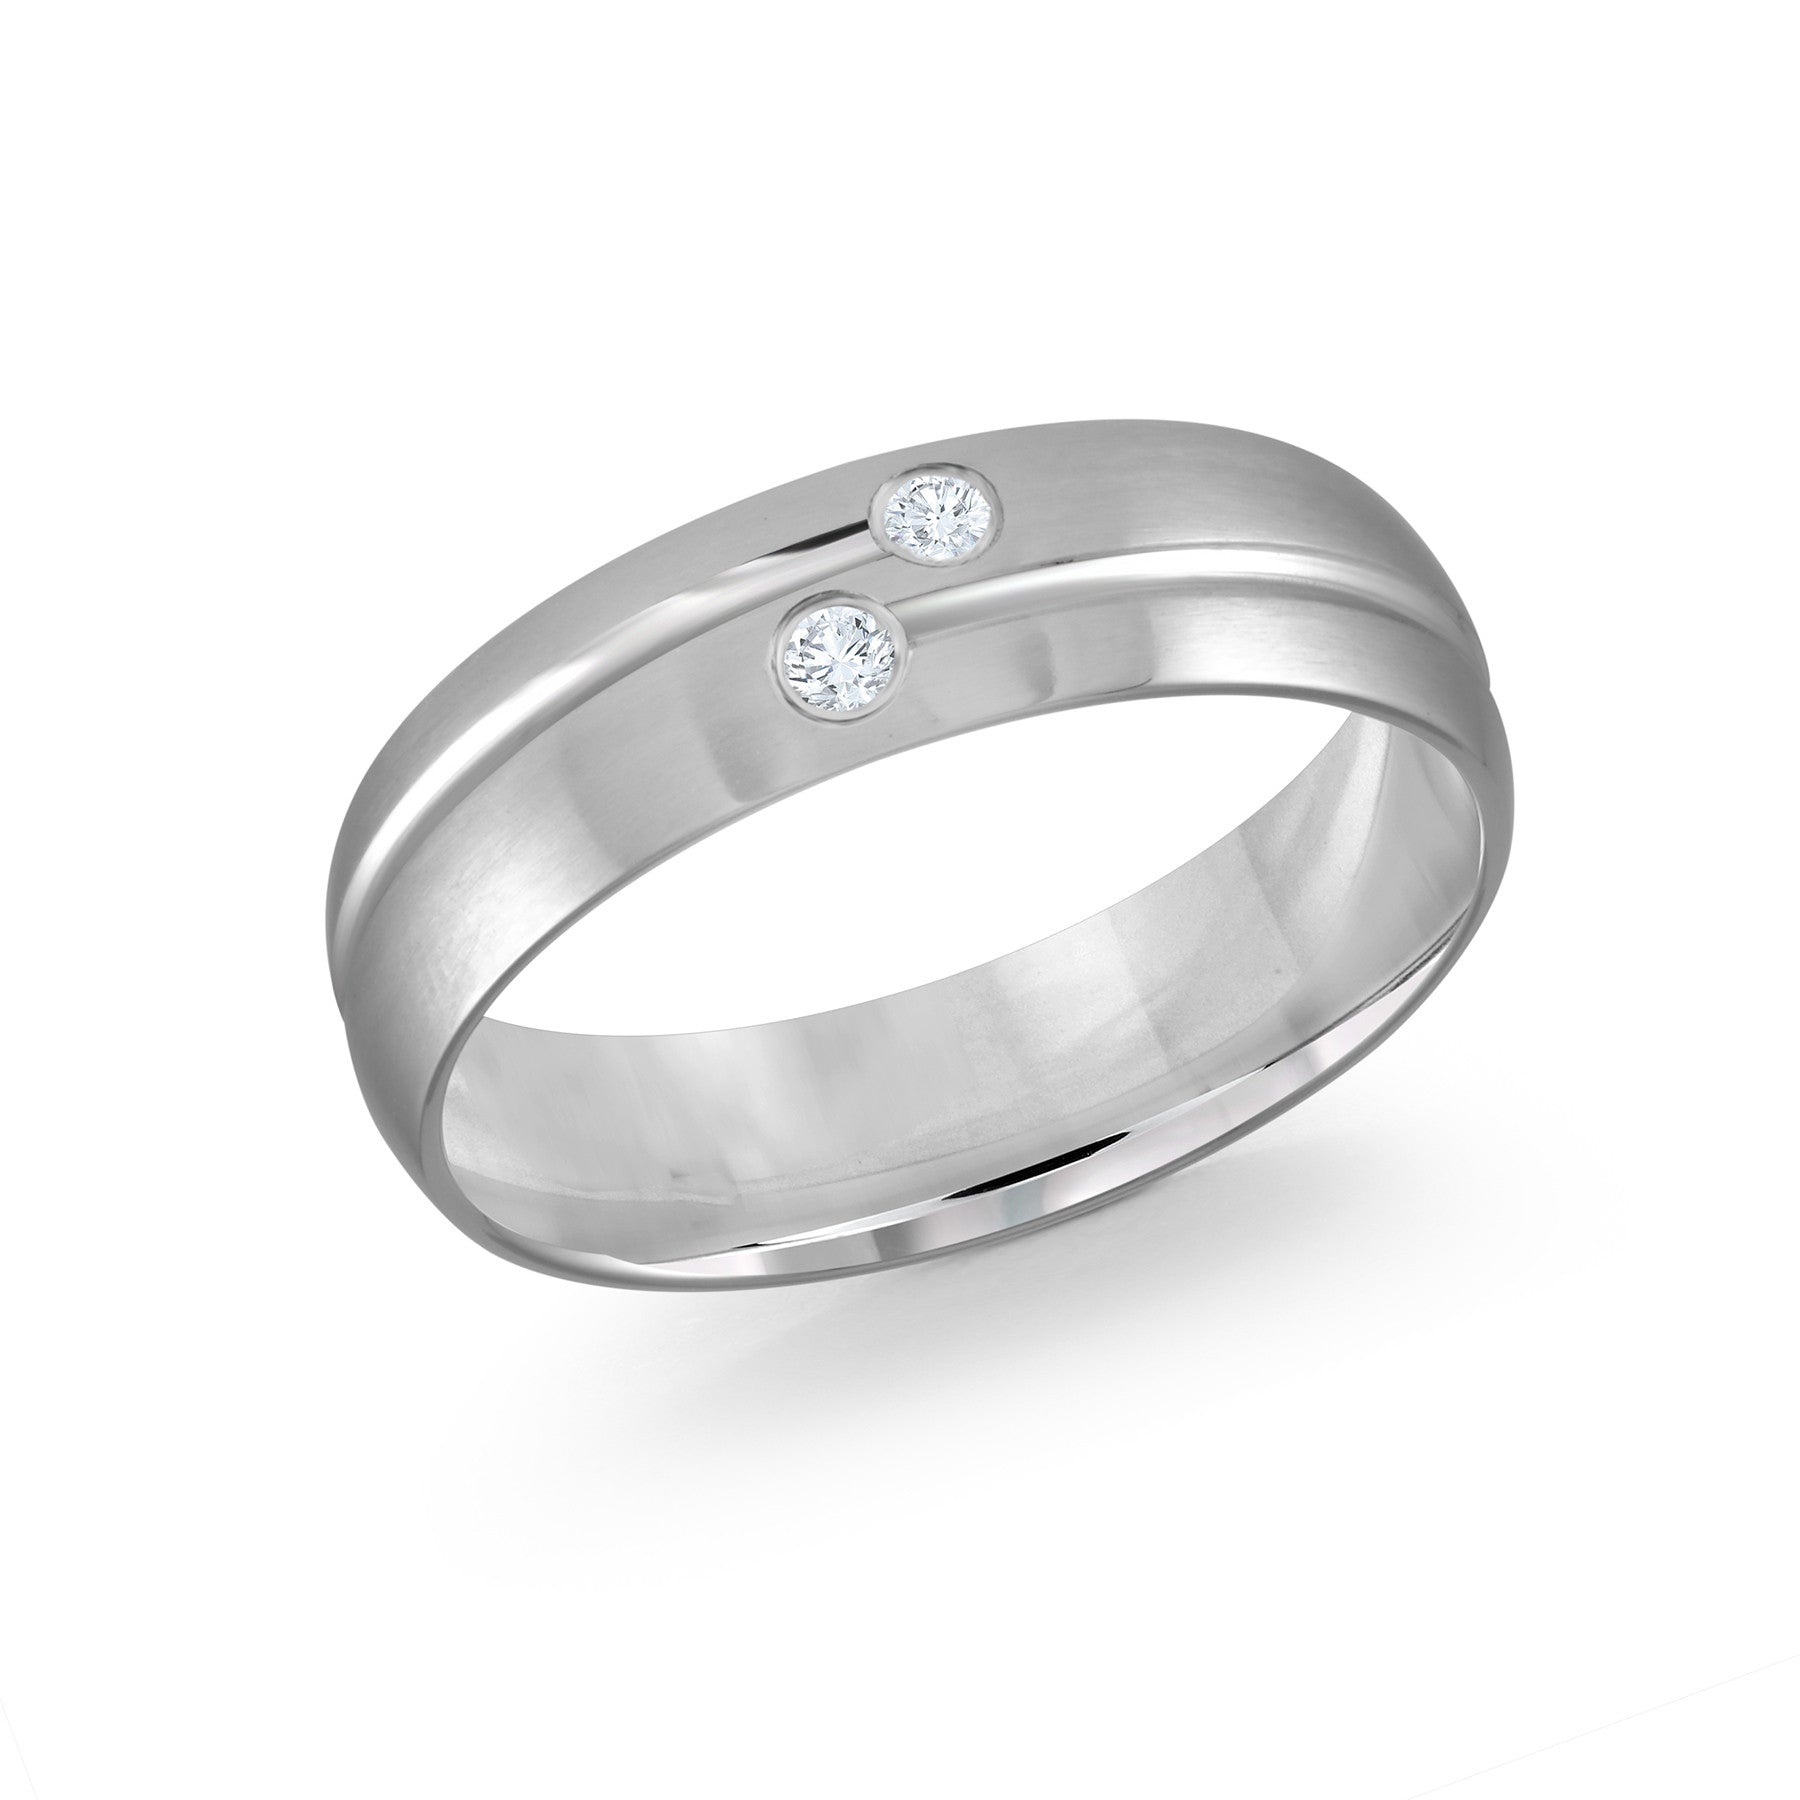 Mens Diamond White Gold Wedding Band with a Striped Design in Satin ...